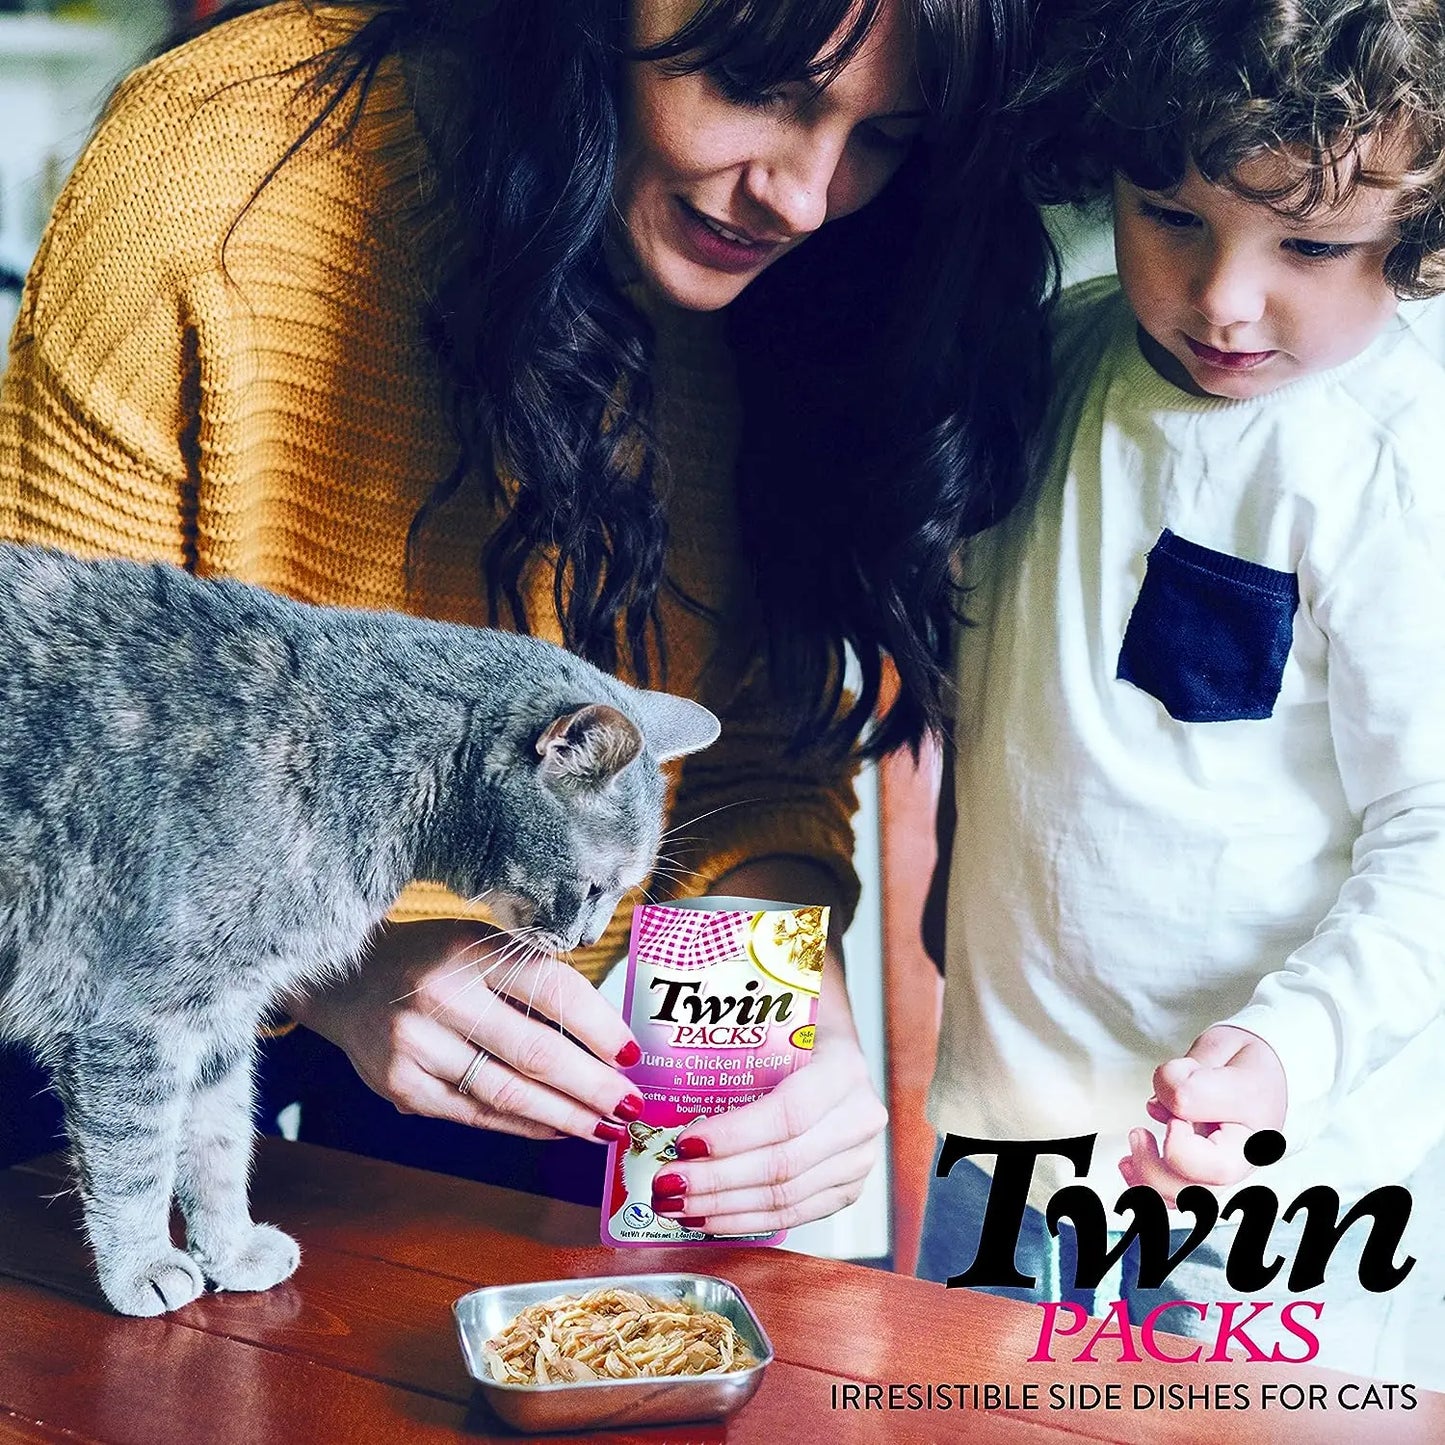 Inaba Twin Packs Chicken Recipe in Chicken Broth for Cats Inaba